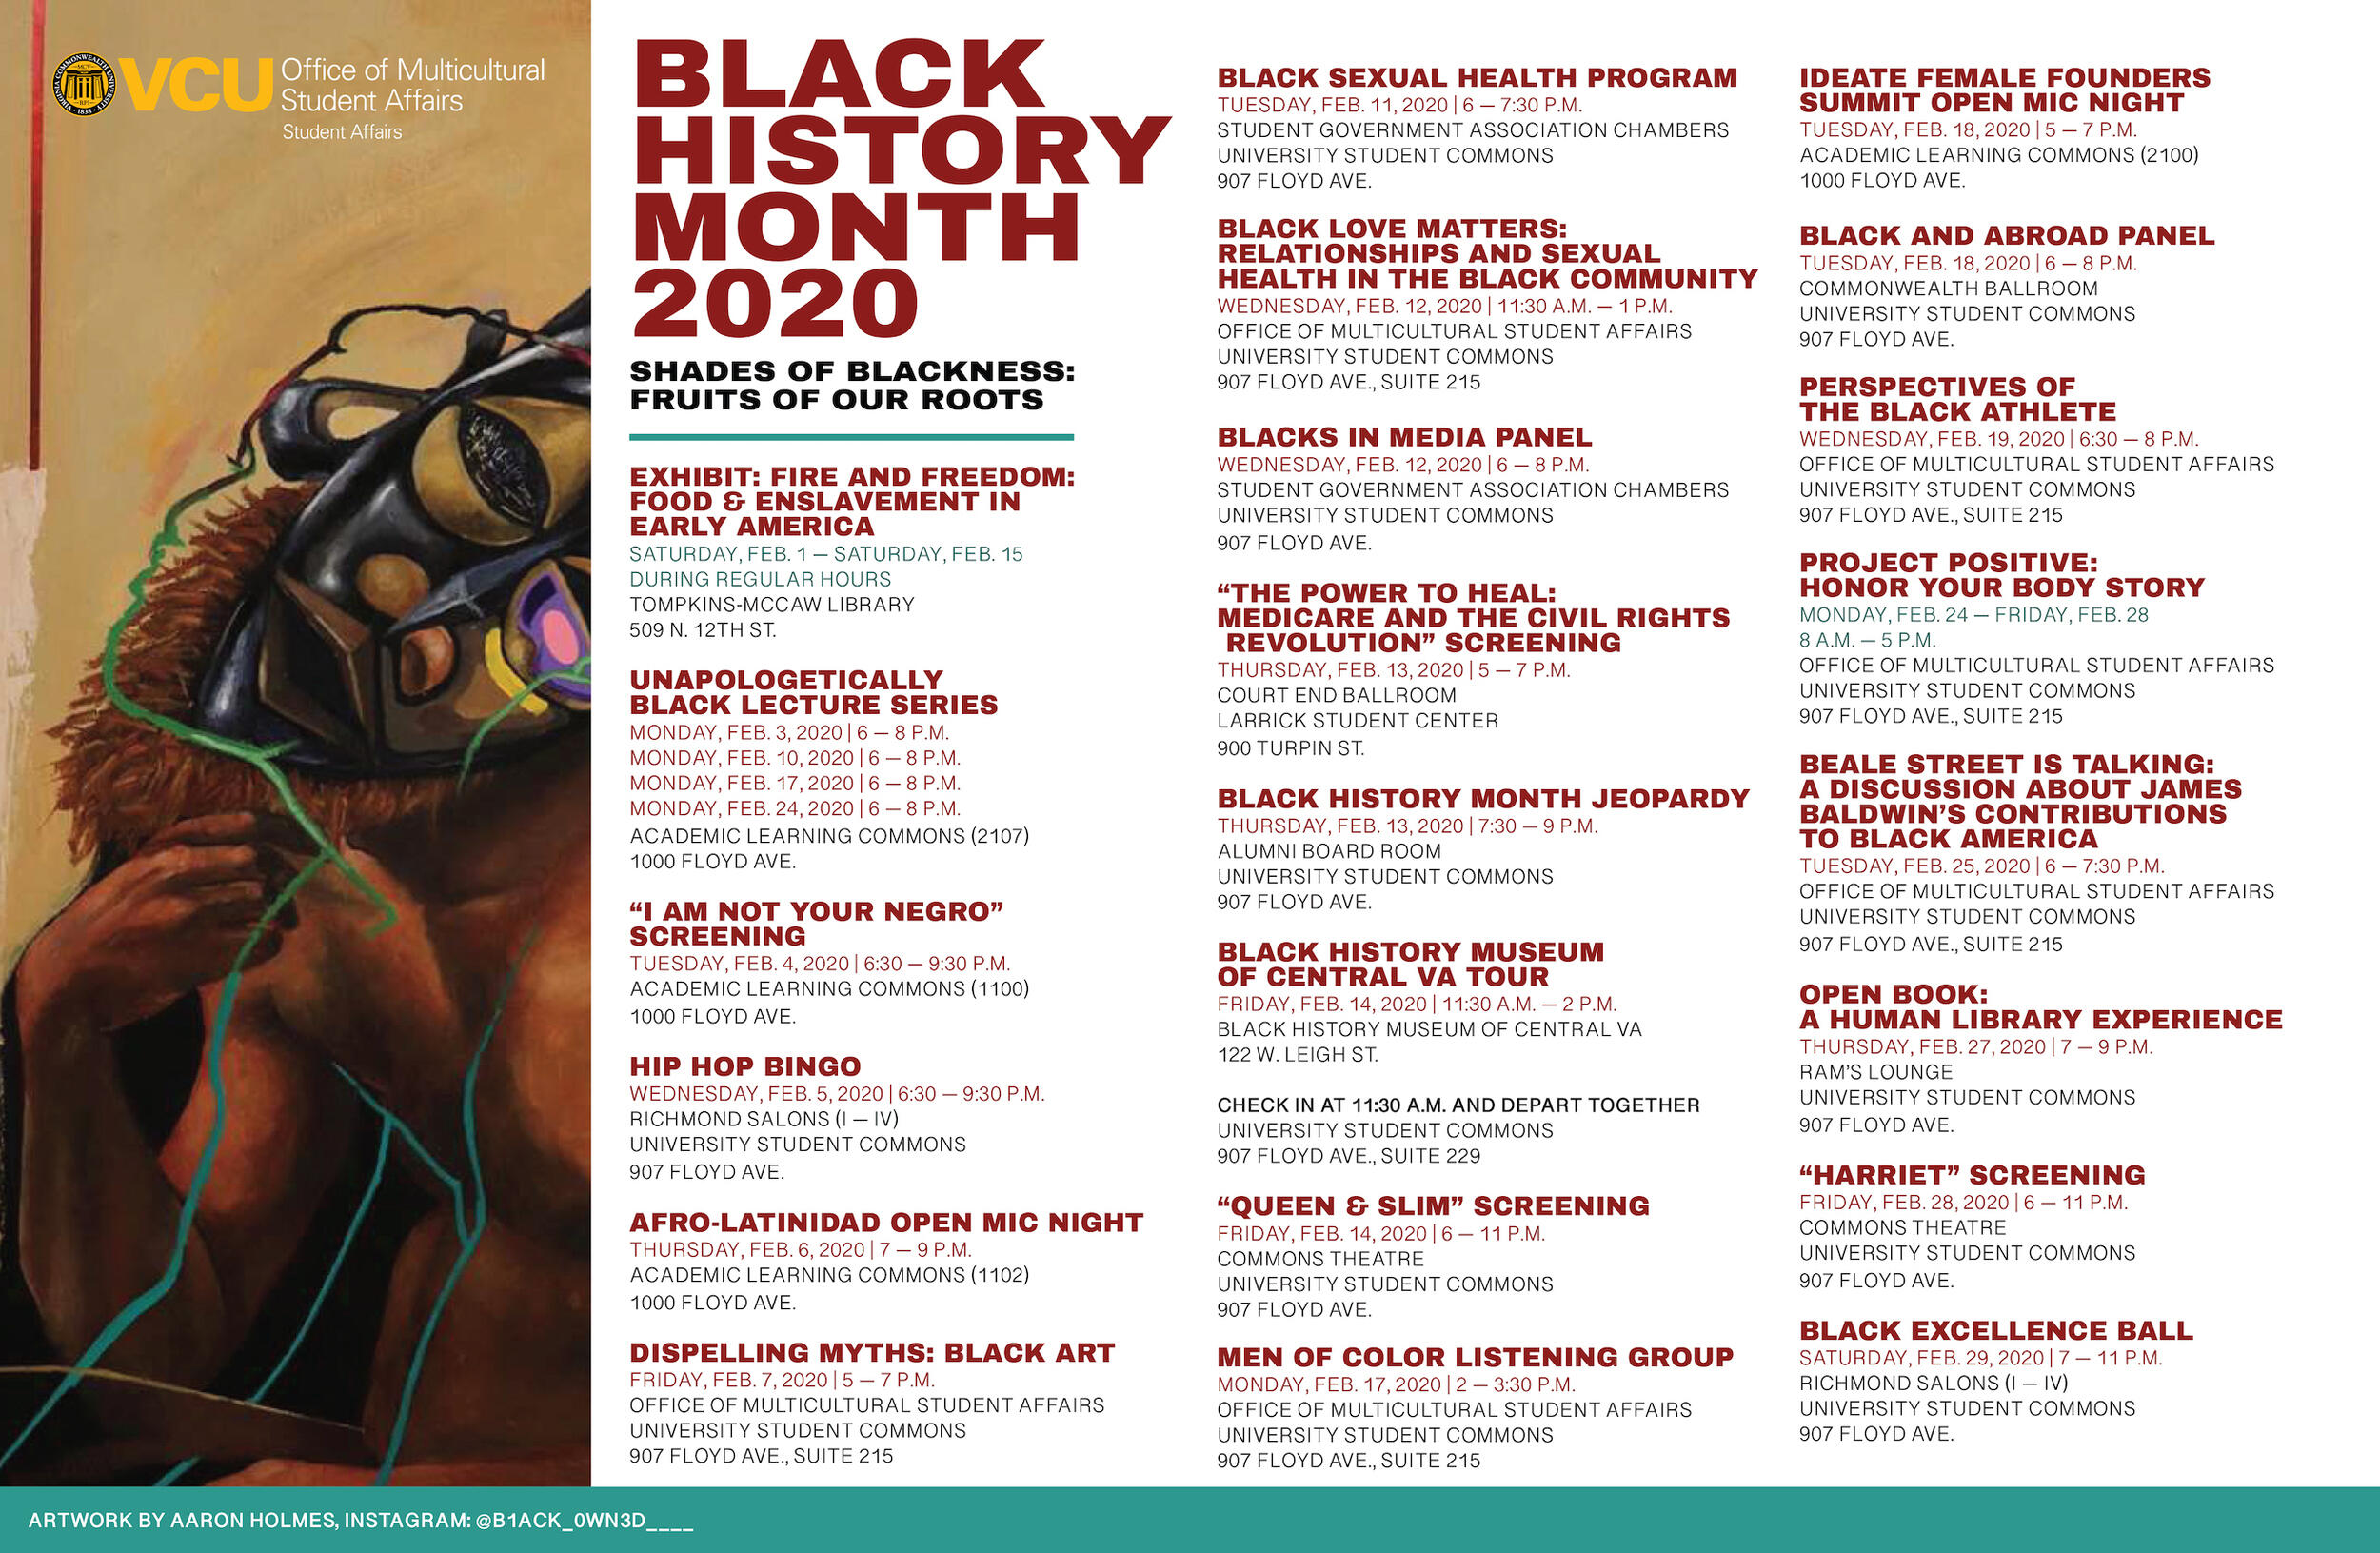 Poster of 2020 Black History Month events at VCU